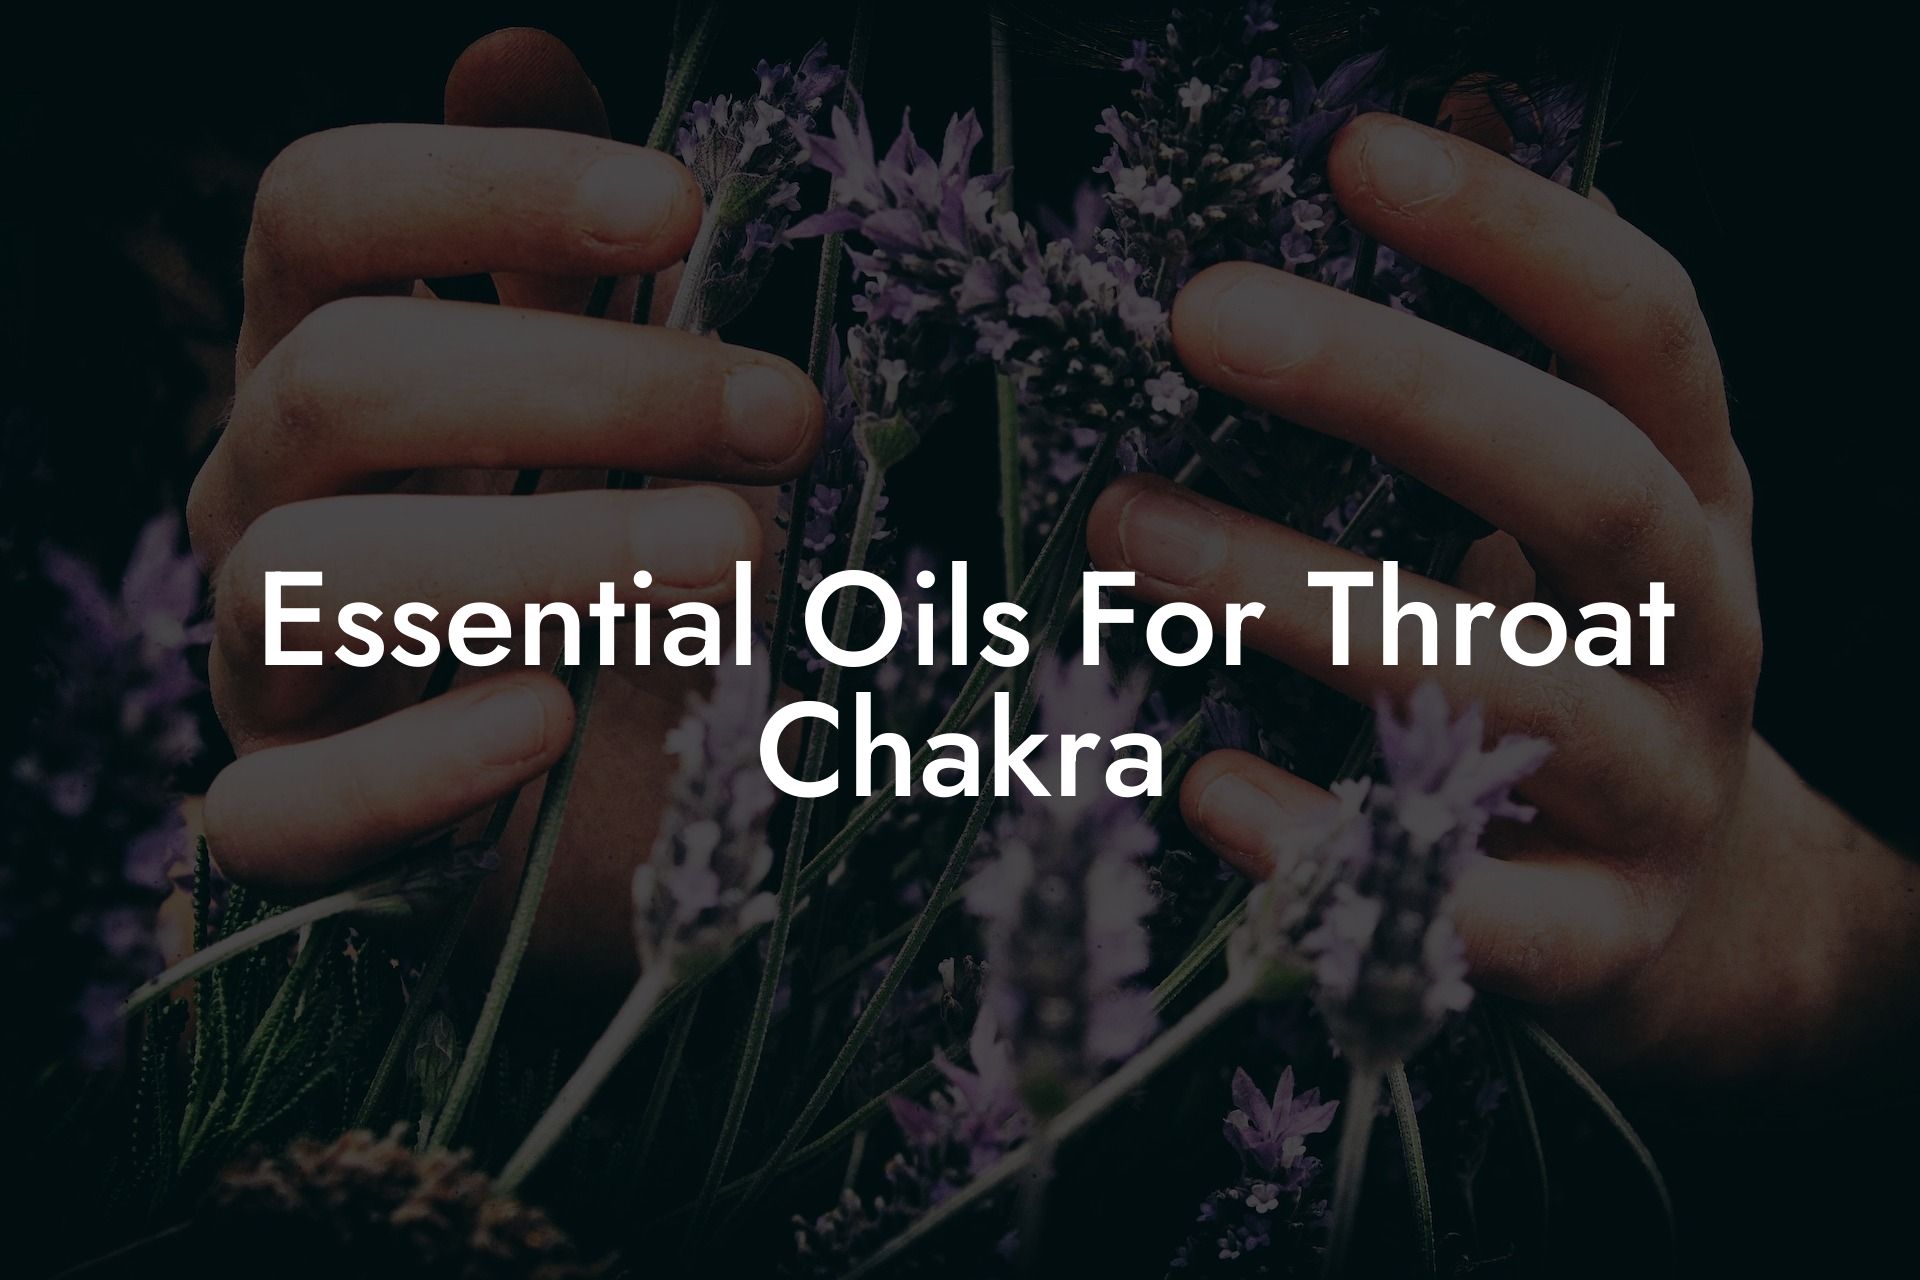 Essential Oils For Throat Chakra